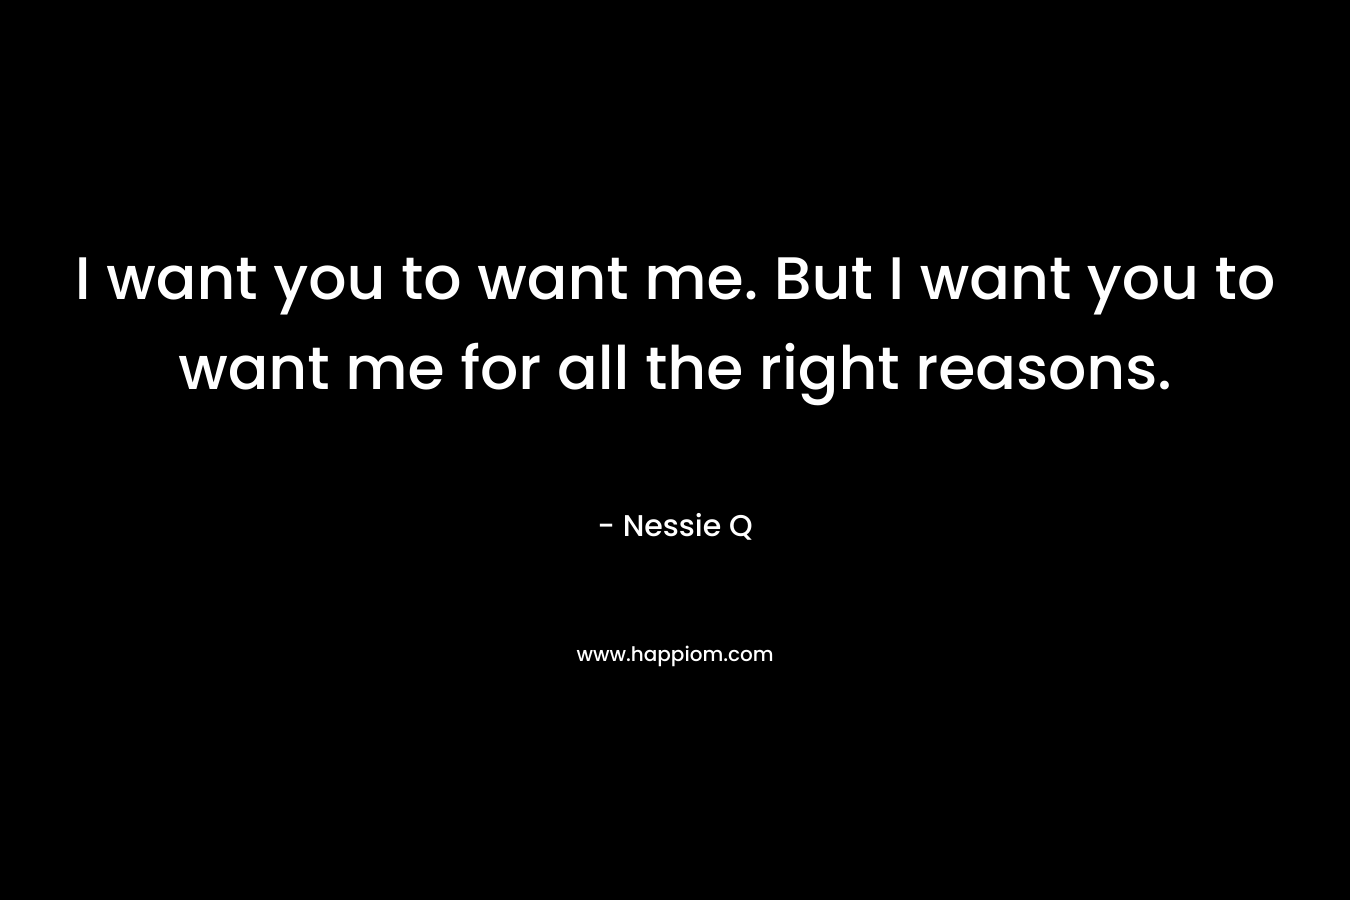 I want you to want me. But I want you to want me for all the right reasons. – Nessie Q